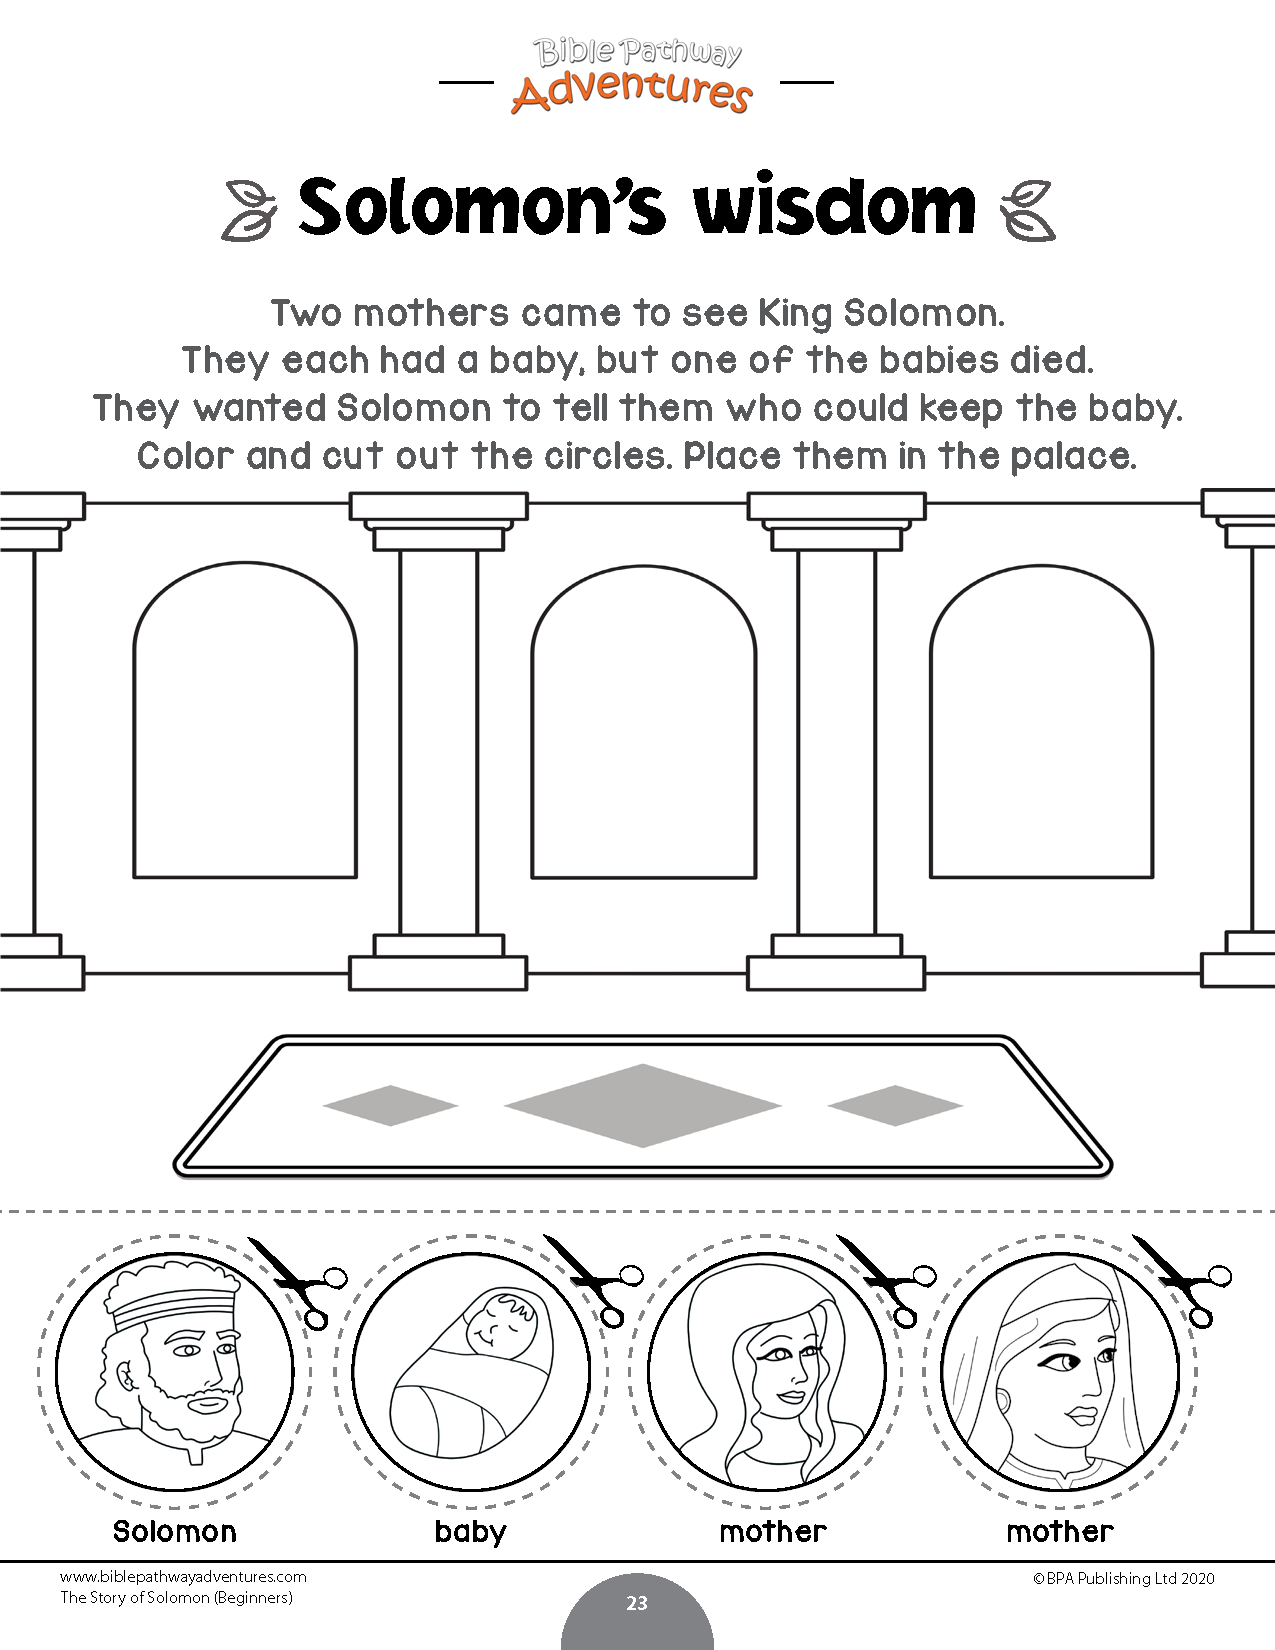 The story of solomon activity book for beginners pdf â bible pathway adventures